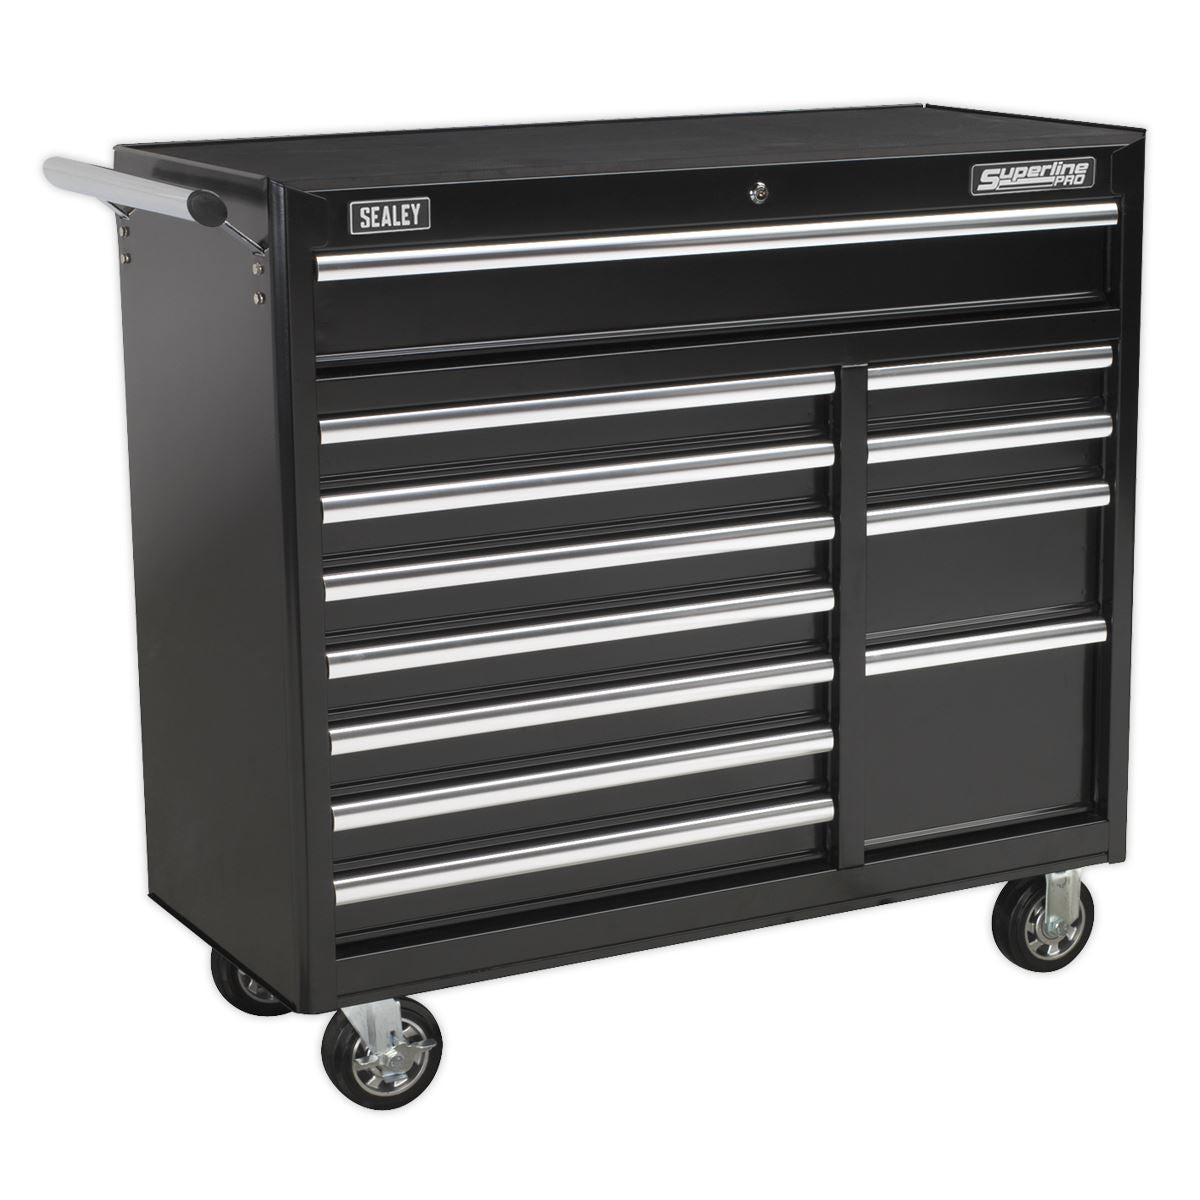 Sealey Superline Pro Rollcab 12 Drawer with Ball-Bearing Slides Heavy-Duty - Black